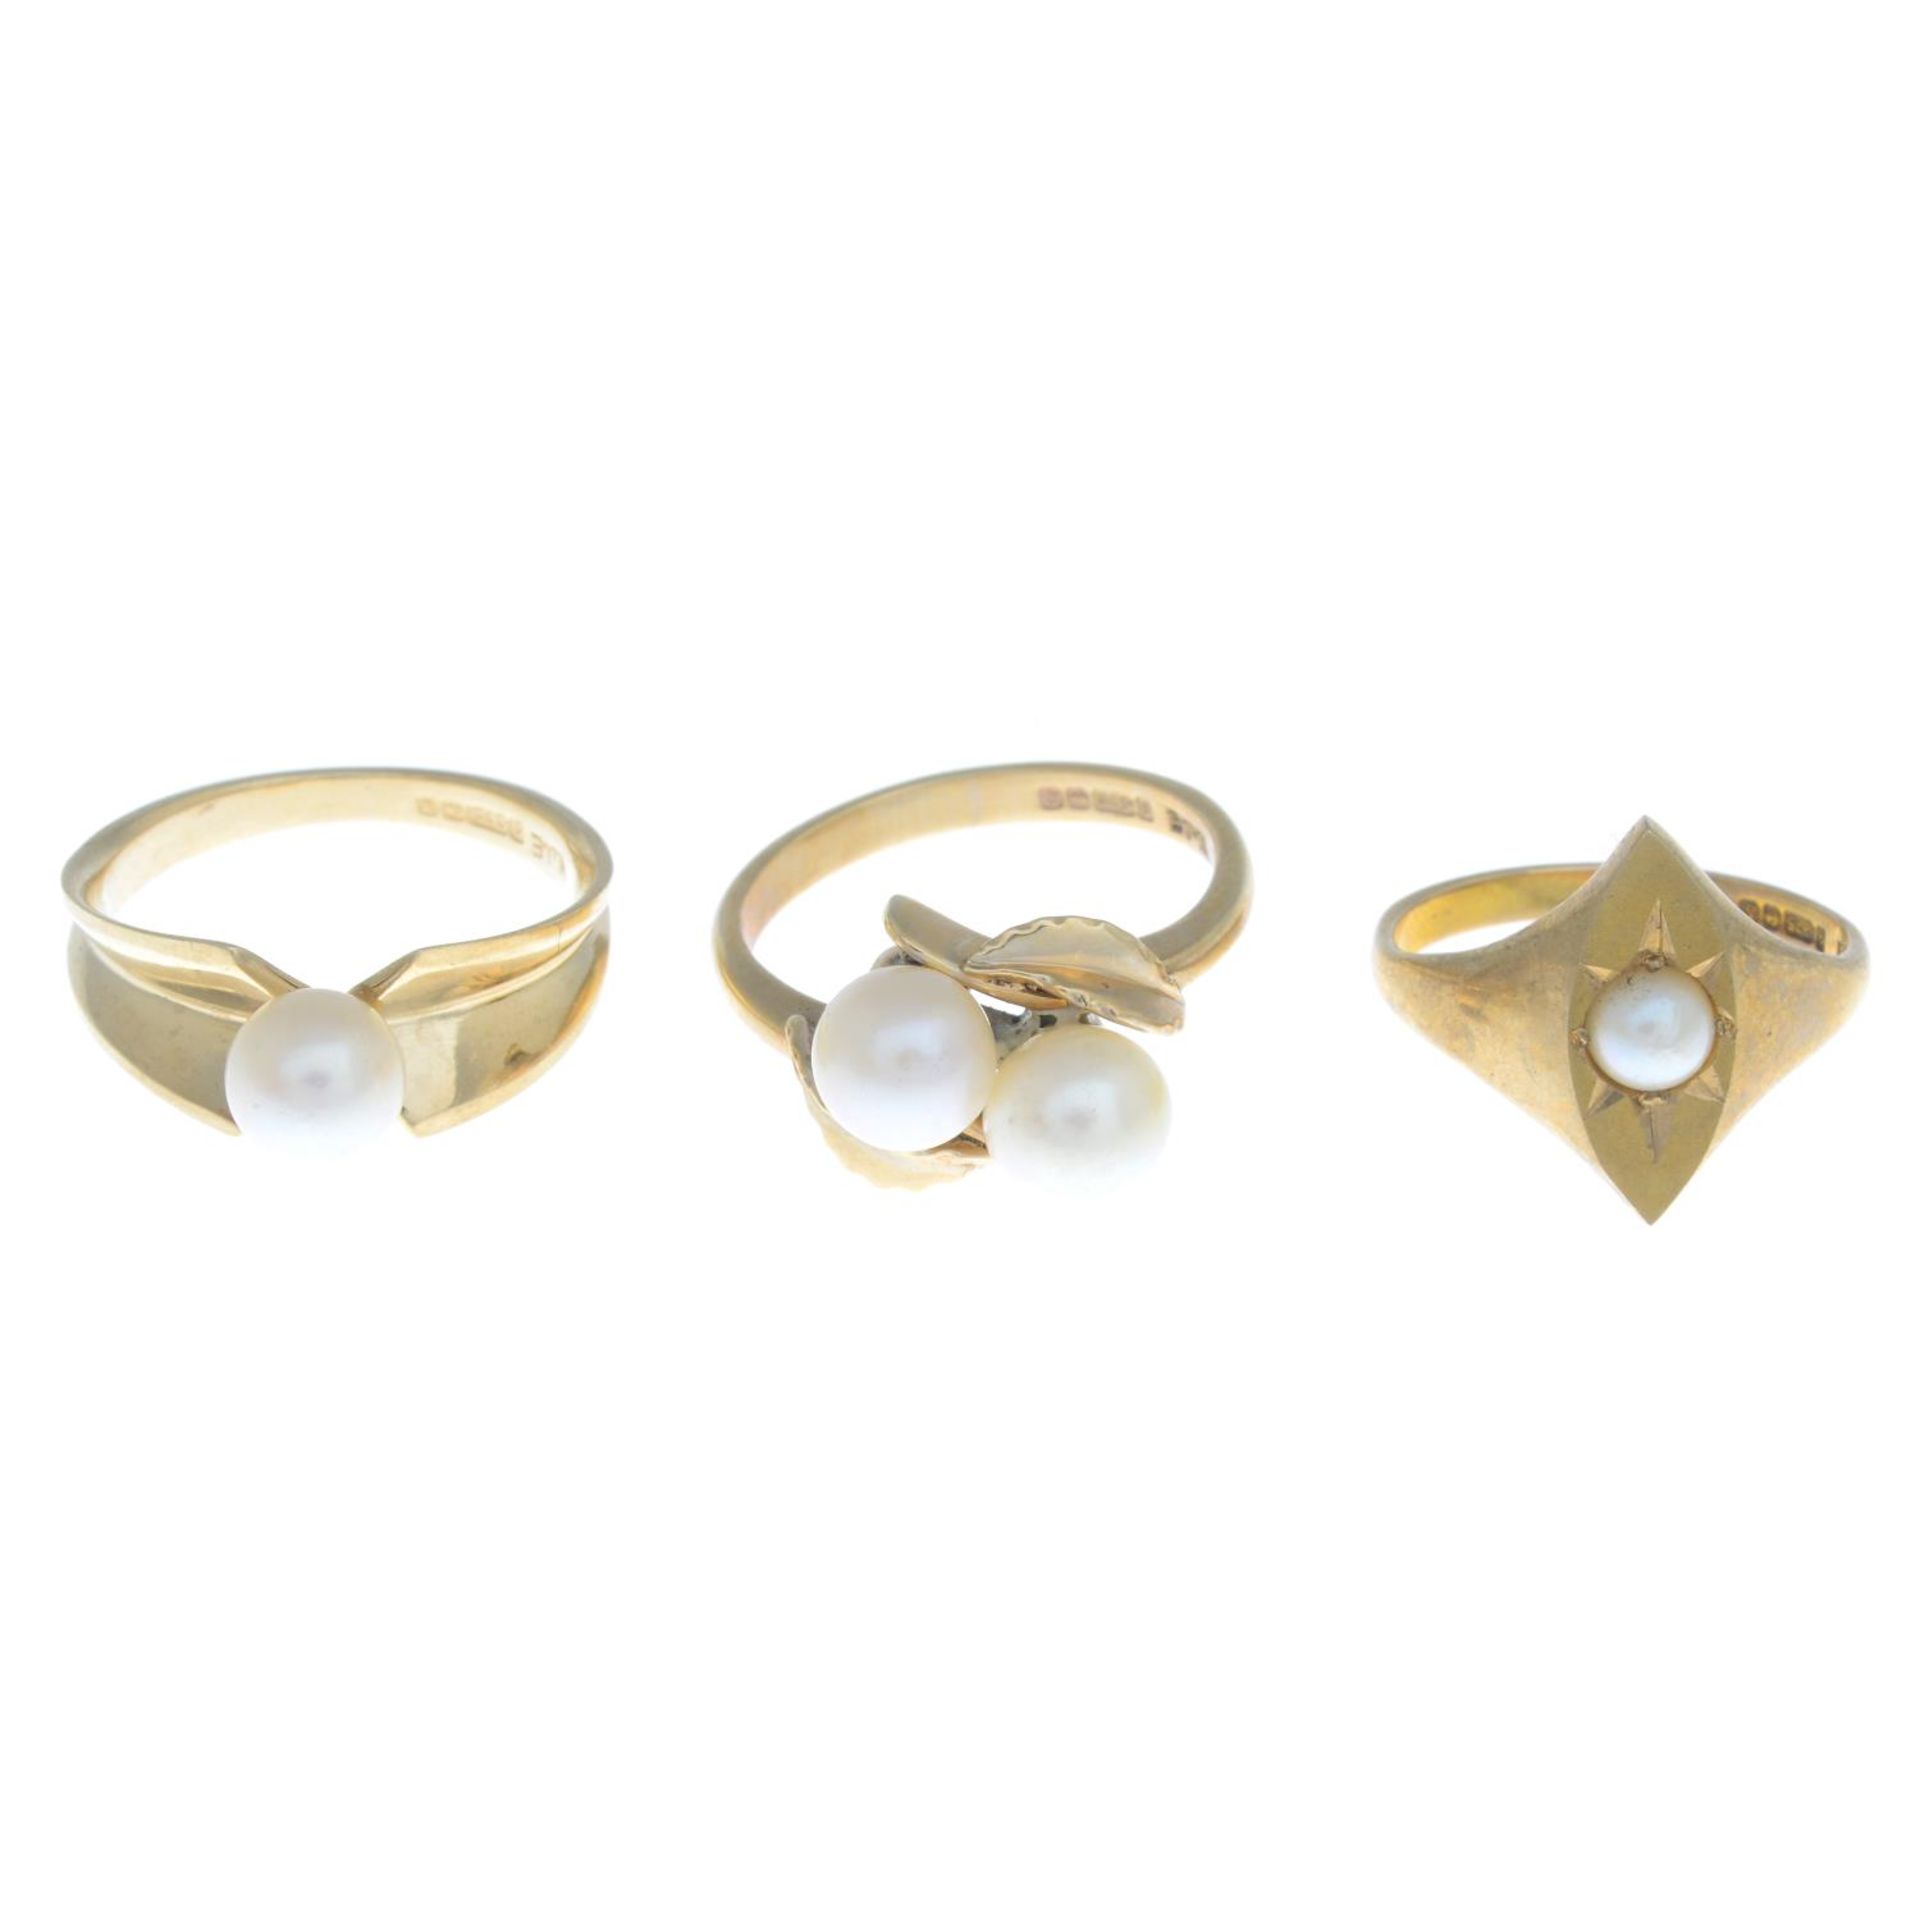 Three 9ct gold cultured pearl rings.Hallmarks for 9ct gold.